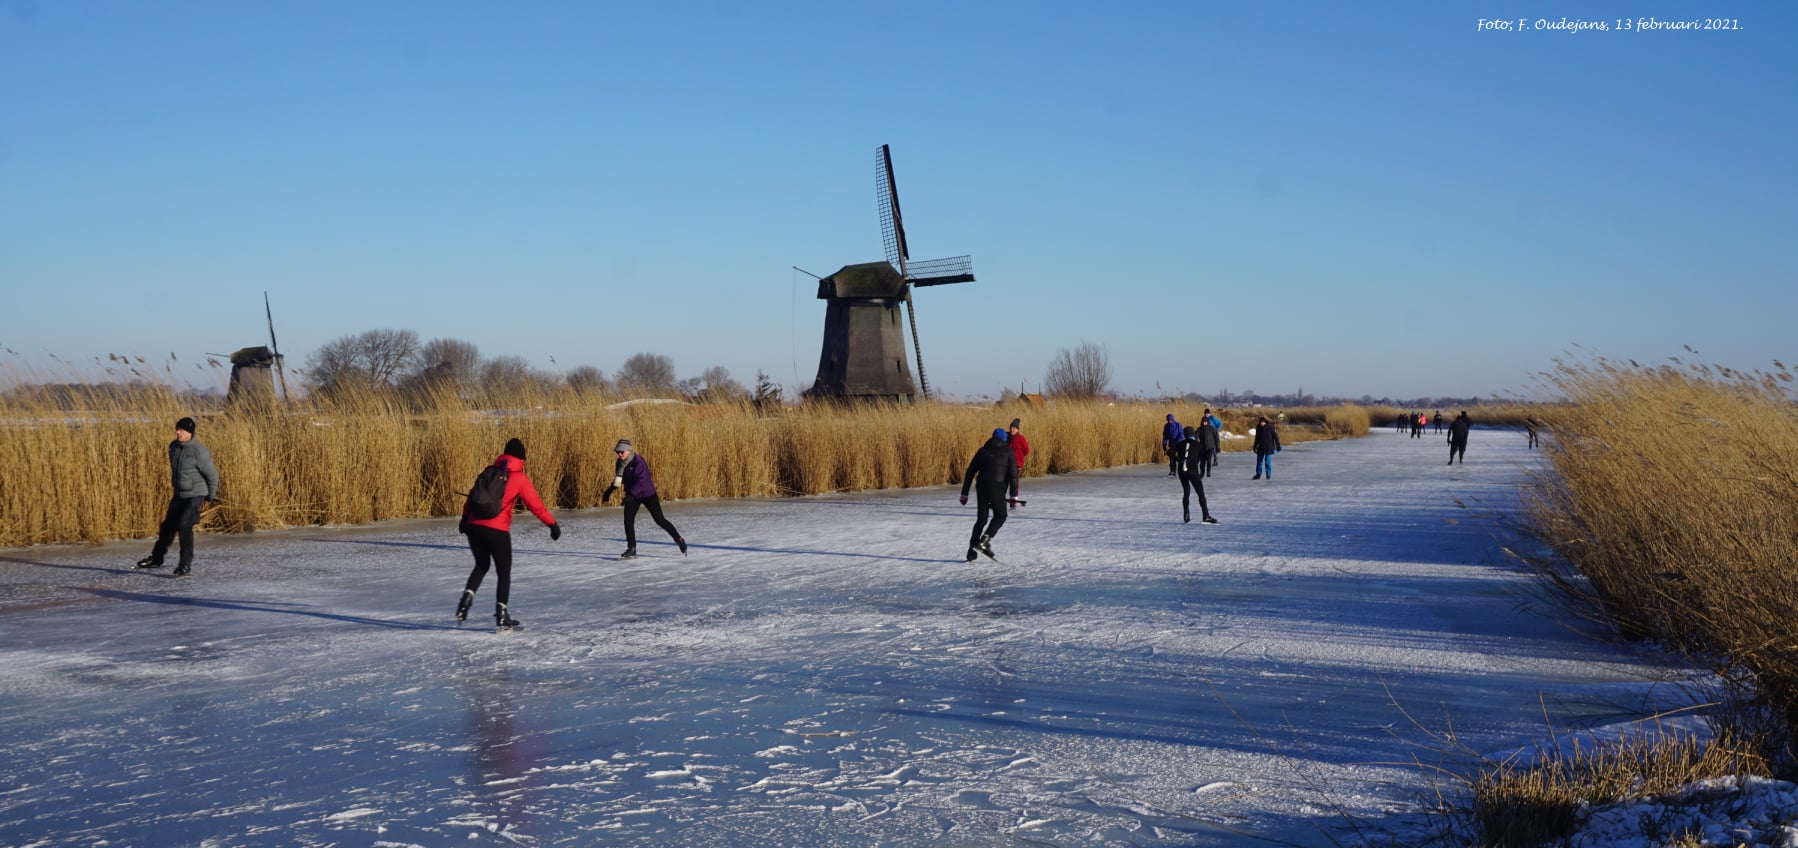 people ice skating on a canal near a traditional windmill under a clear blue sky